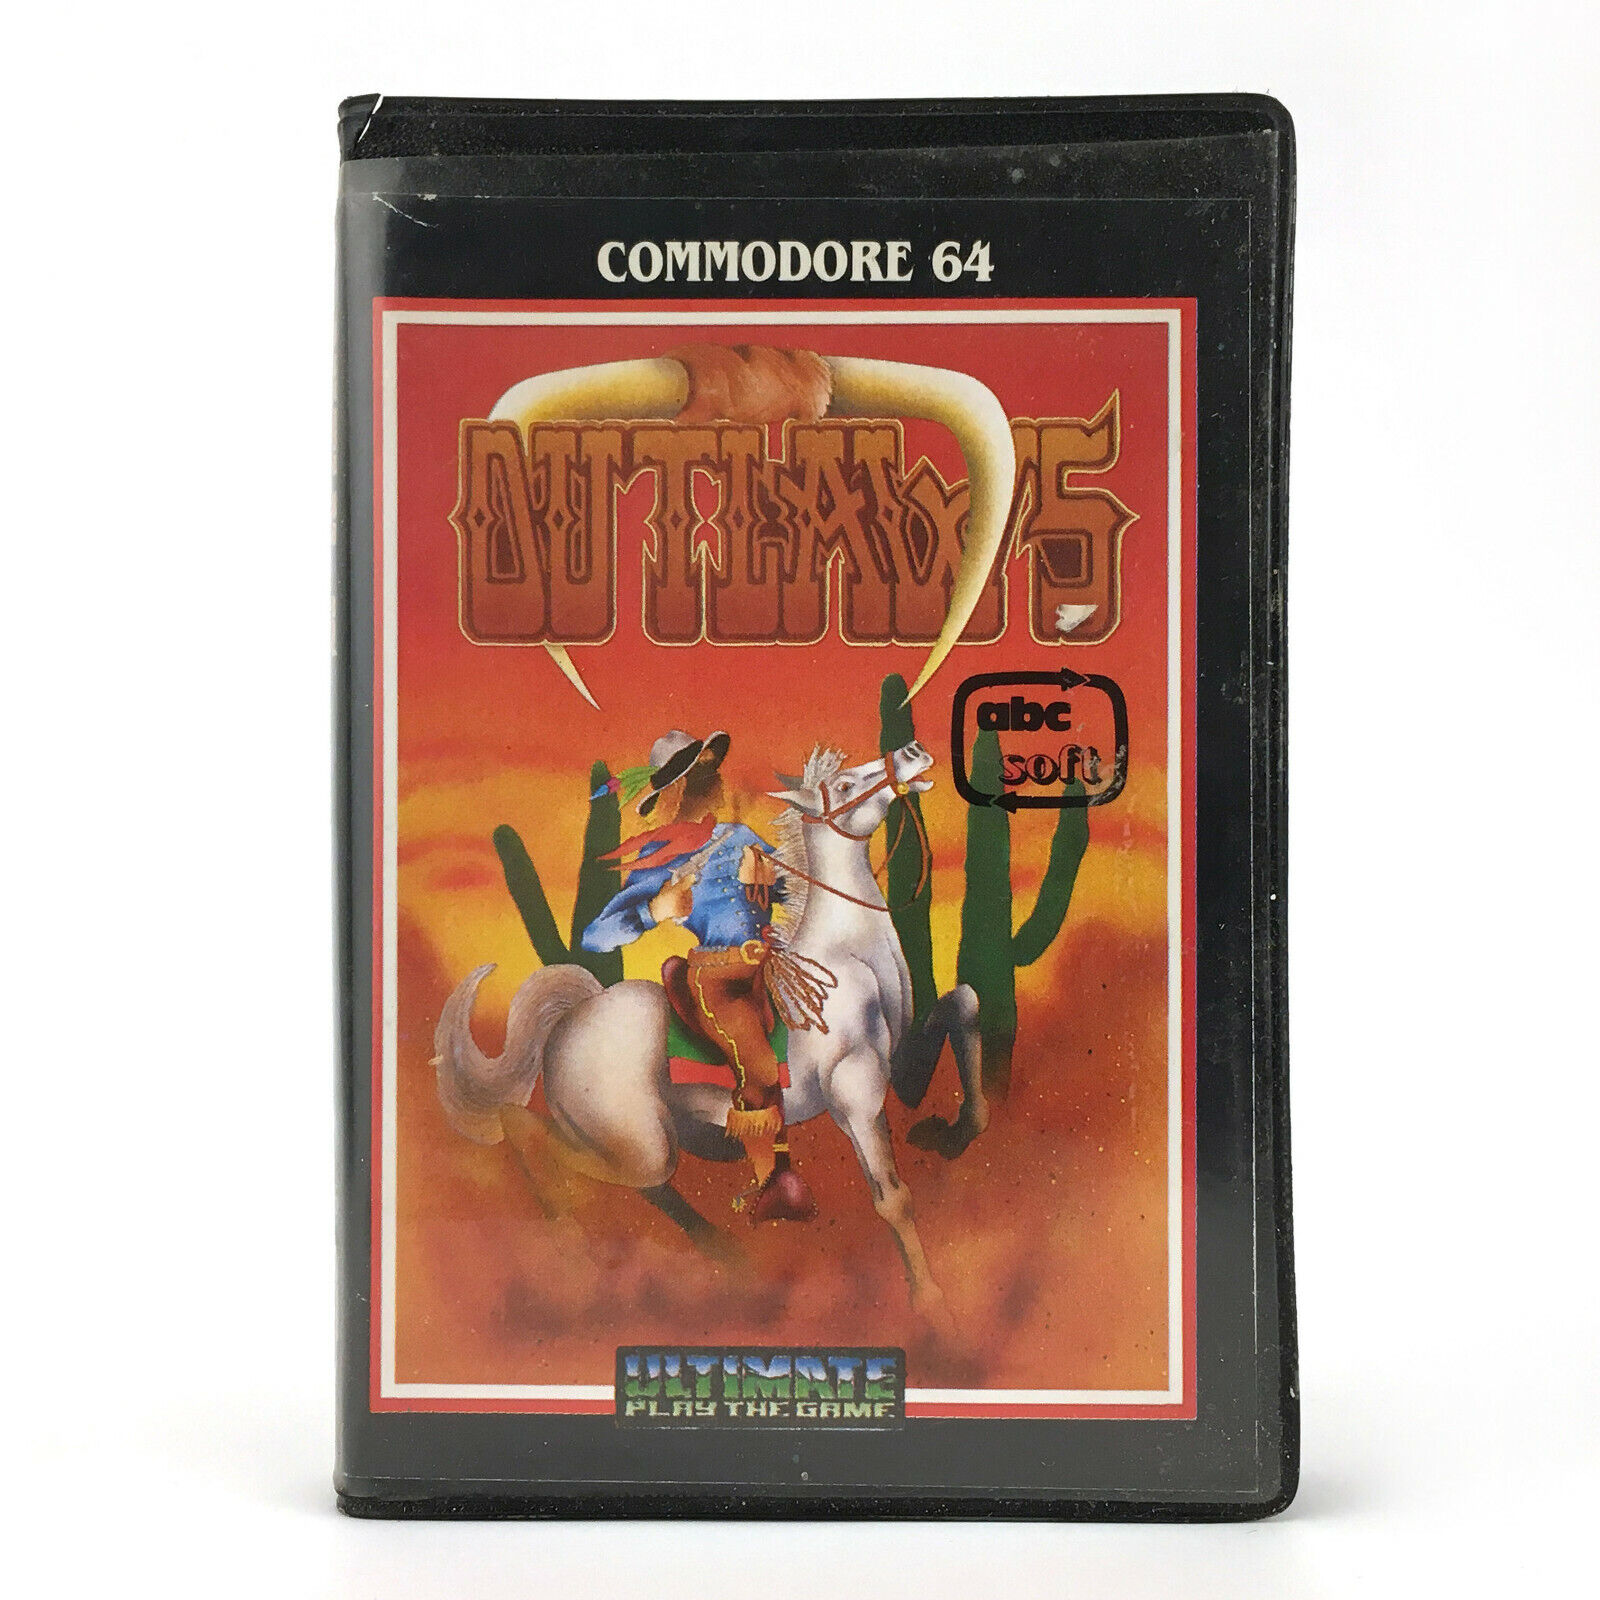 COMMODORE 64 C64 OUTLAWS ESTUCHE ABC SOFT / ULTIMATE PLAY THE GAME...